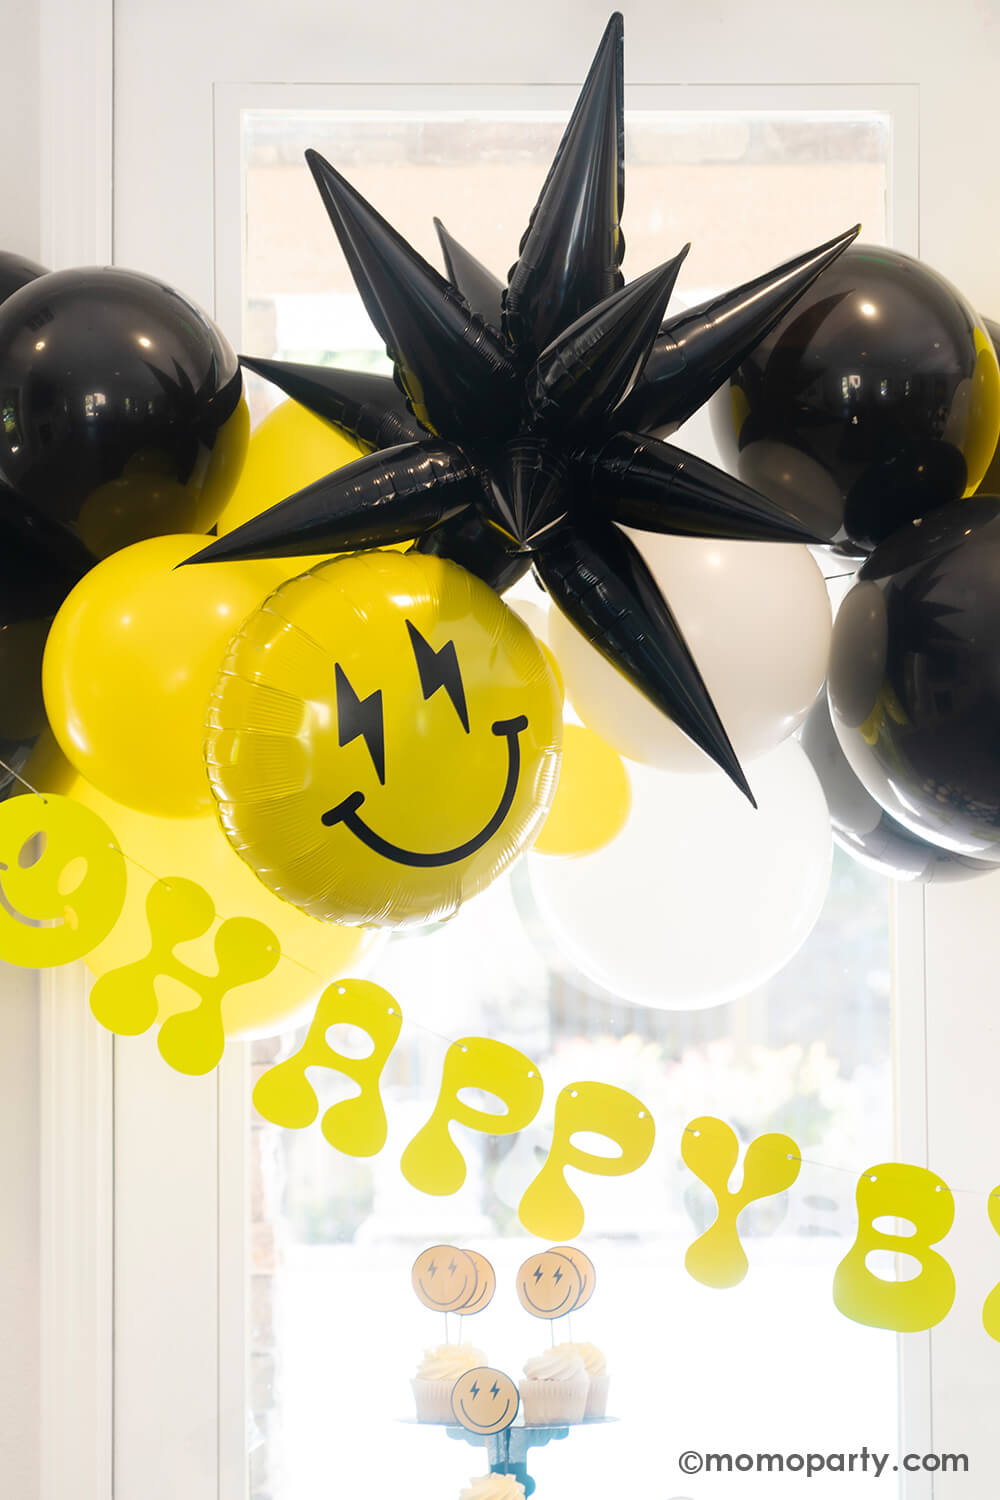 A close-up look at Momo Party's 'Cool Dude' themed Birthday Party. Featuring a captivating balloon garland in black, white, and yellow, accented by a black starburst foil balloon and a smiley face foil balloon with lightning bolt eyes. This stylish decor is complemented by a retro neon happy birthday banner. Perfect for a boy's 'One Happy Dude' themed first birthday, a 'Two Cool' themed second birthday party, 'Ten Rad Years' 10th birthday celebration, or kids birthday party for all ages.